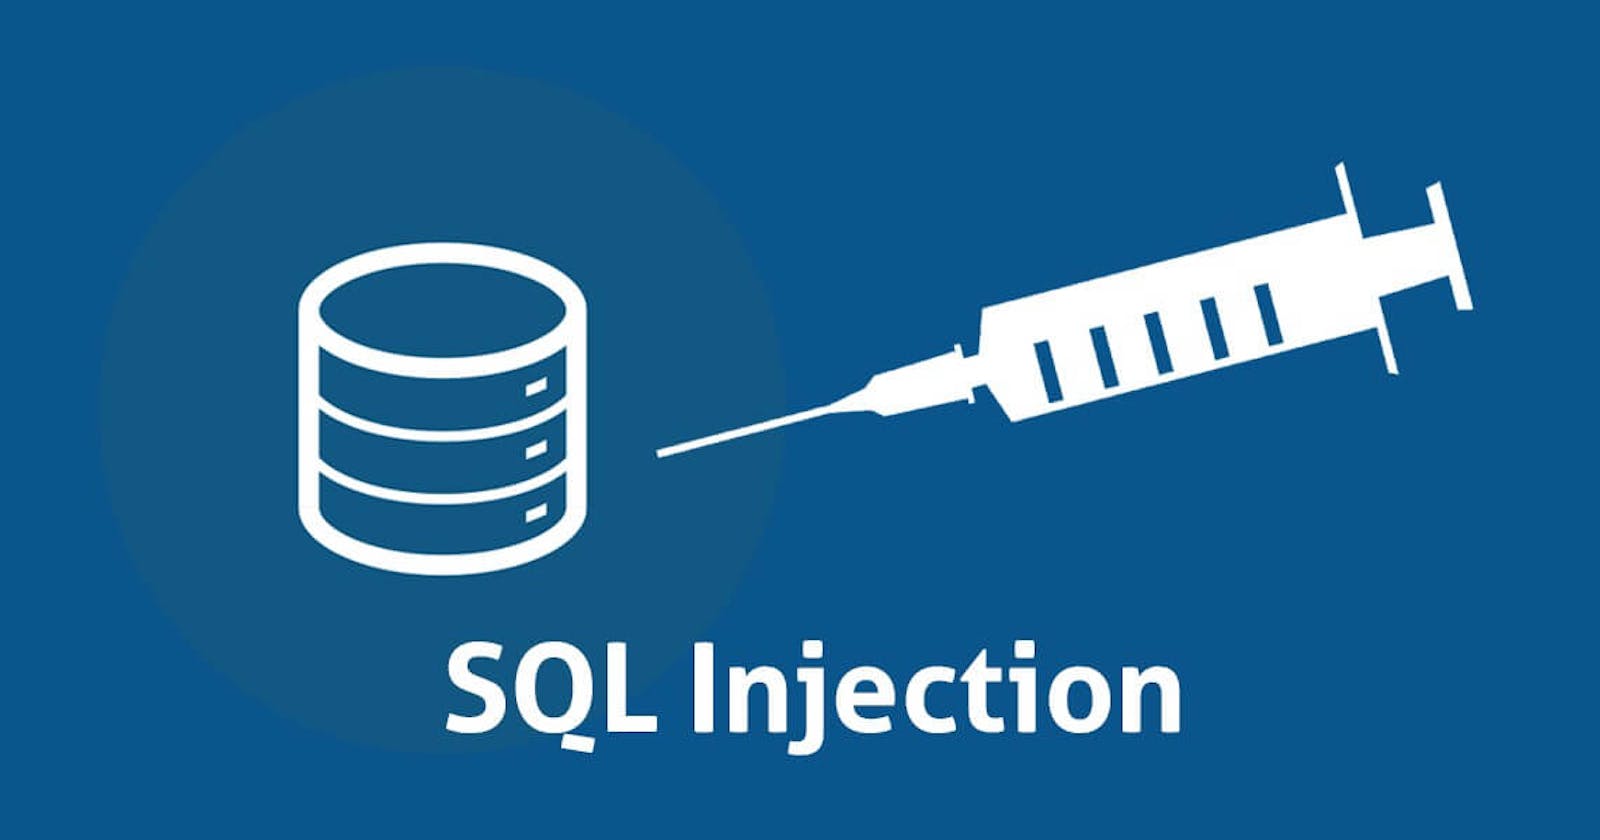 What Is Sql Injection?